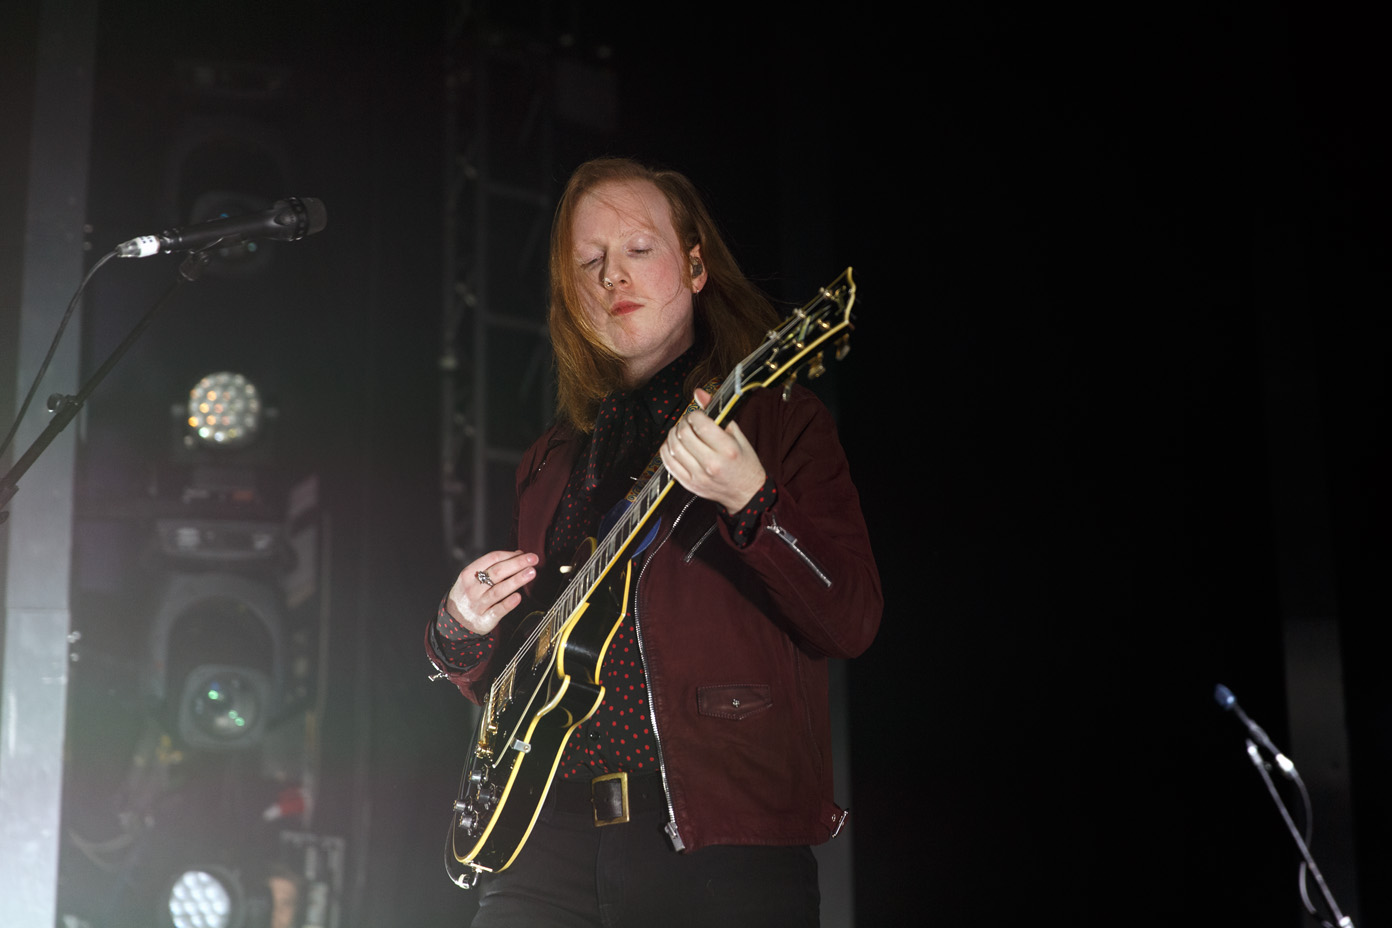 Two Door Cinema Club on stage at the O2 Academy Leeds on 30 January 2017